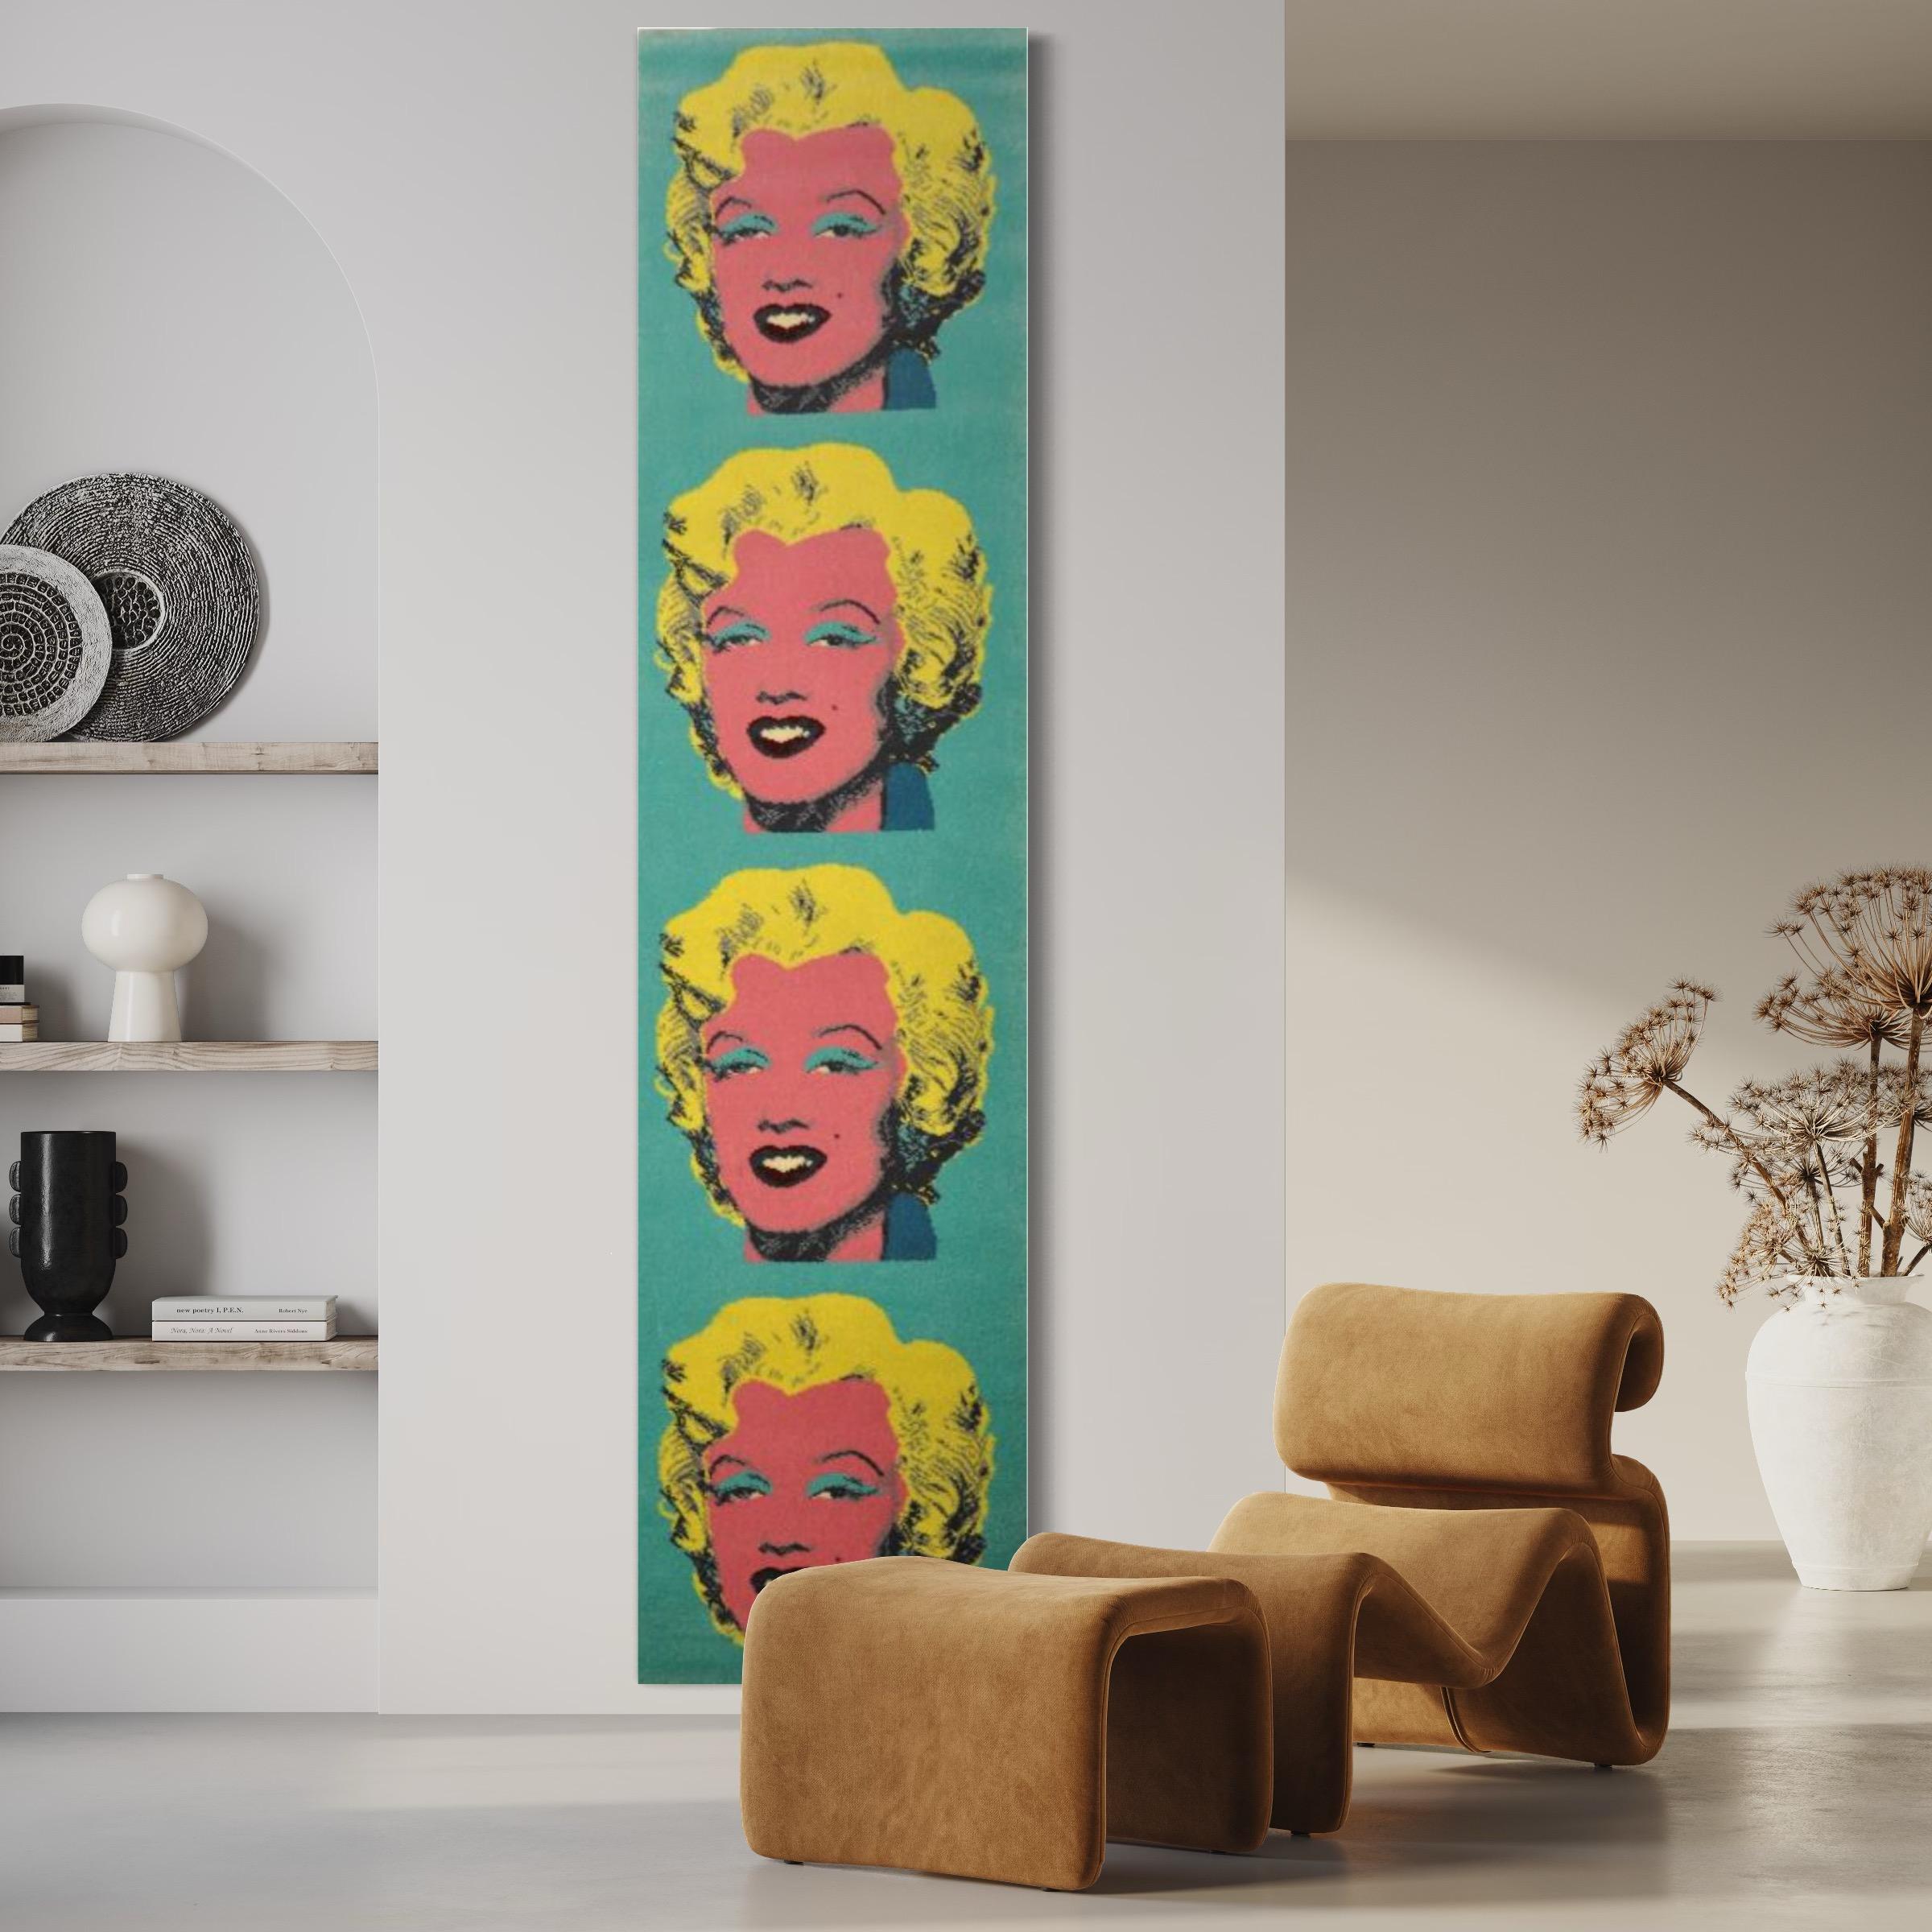 Marilyn in Blue, Andy Warhol, 1964/1997, Hand woven tapestry, Pop Art For  Sale at 1stDibs